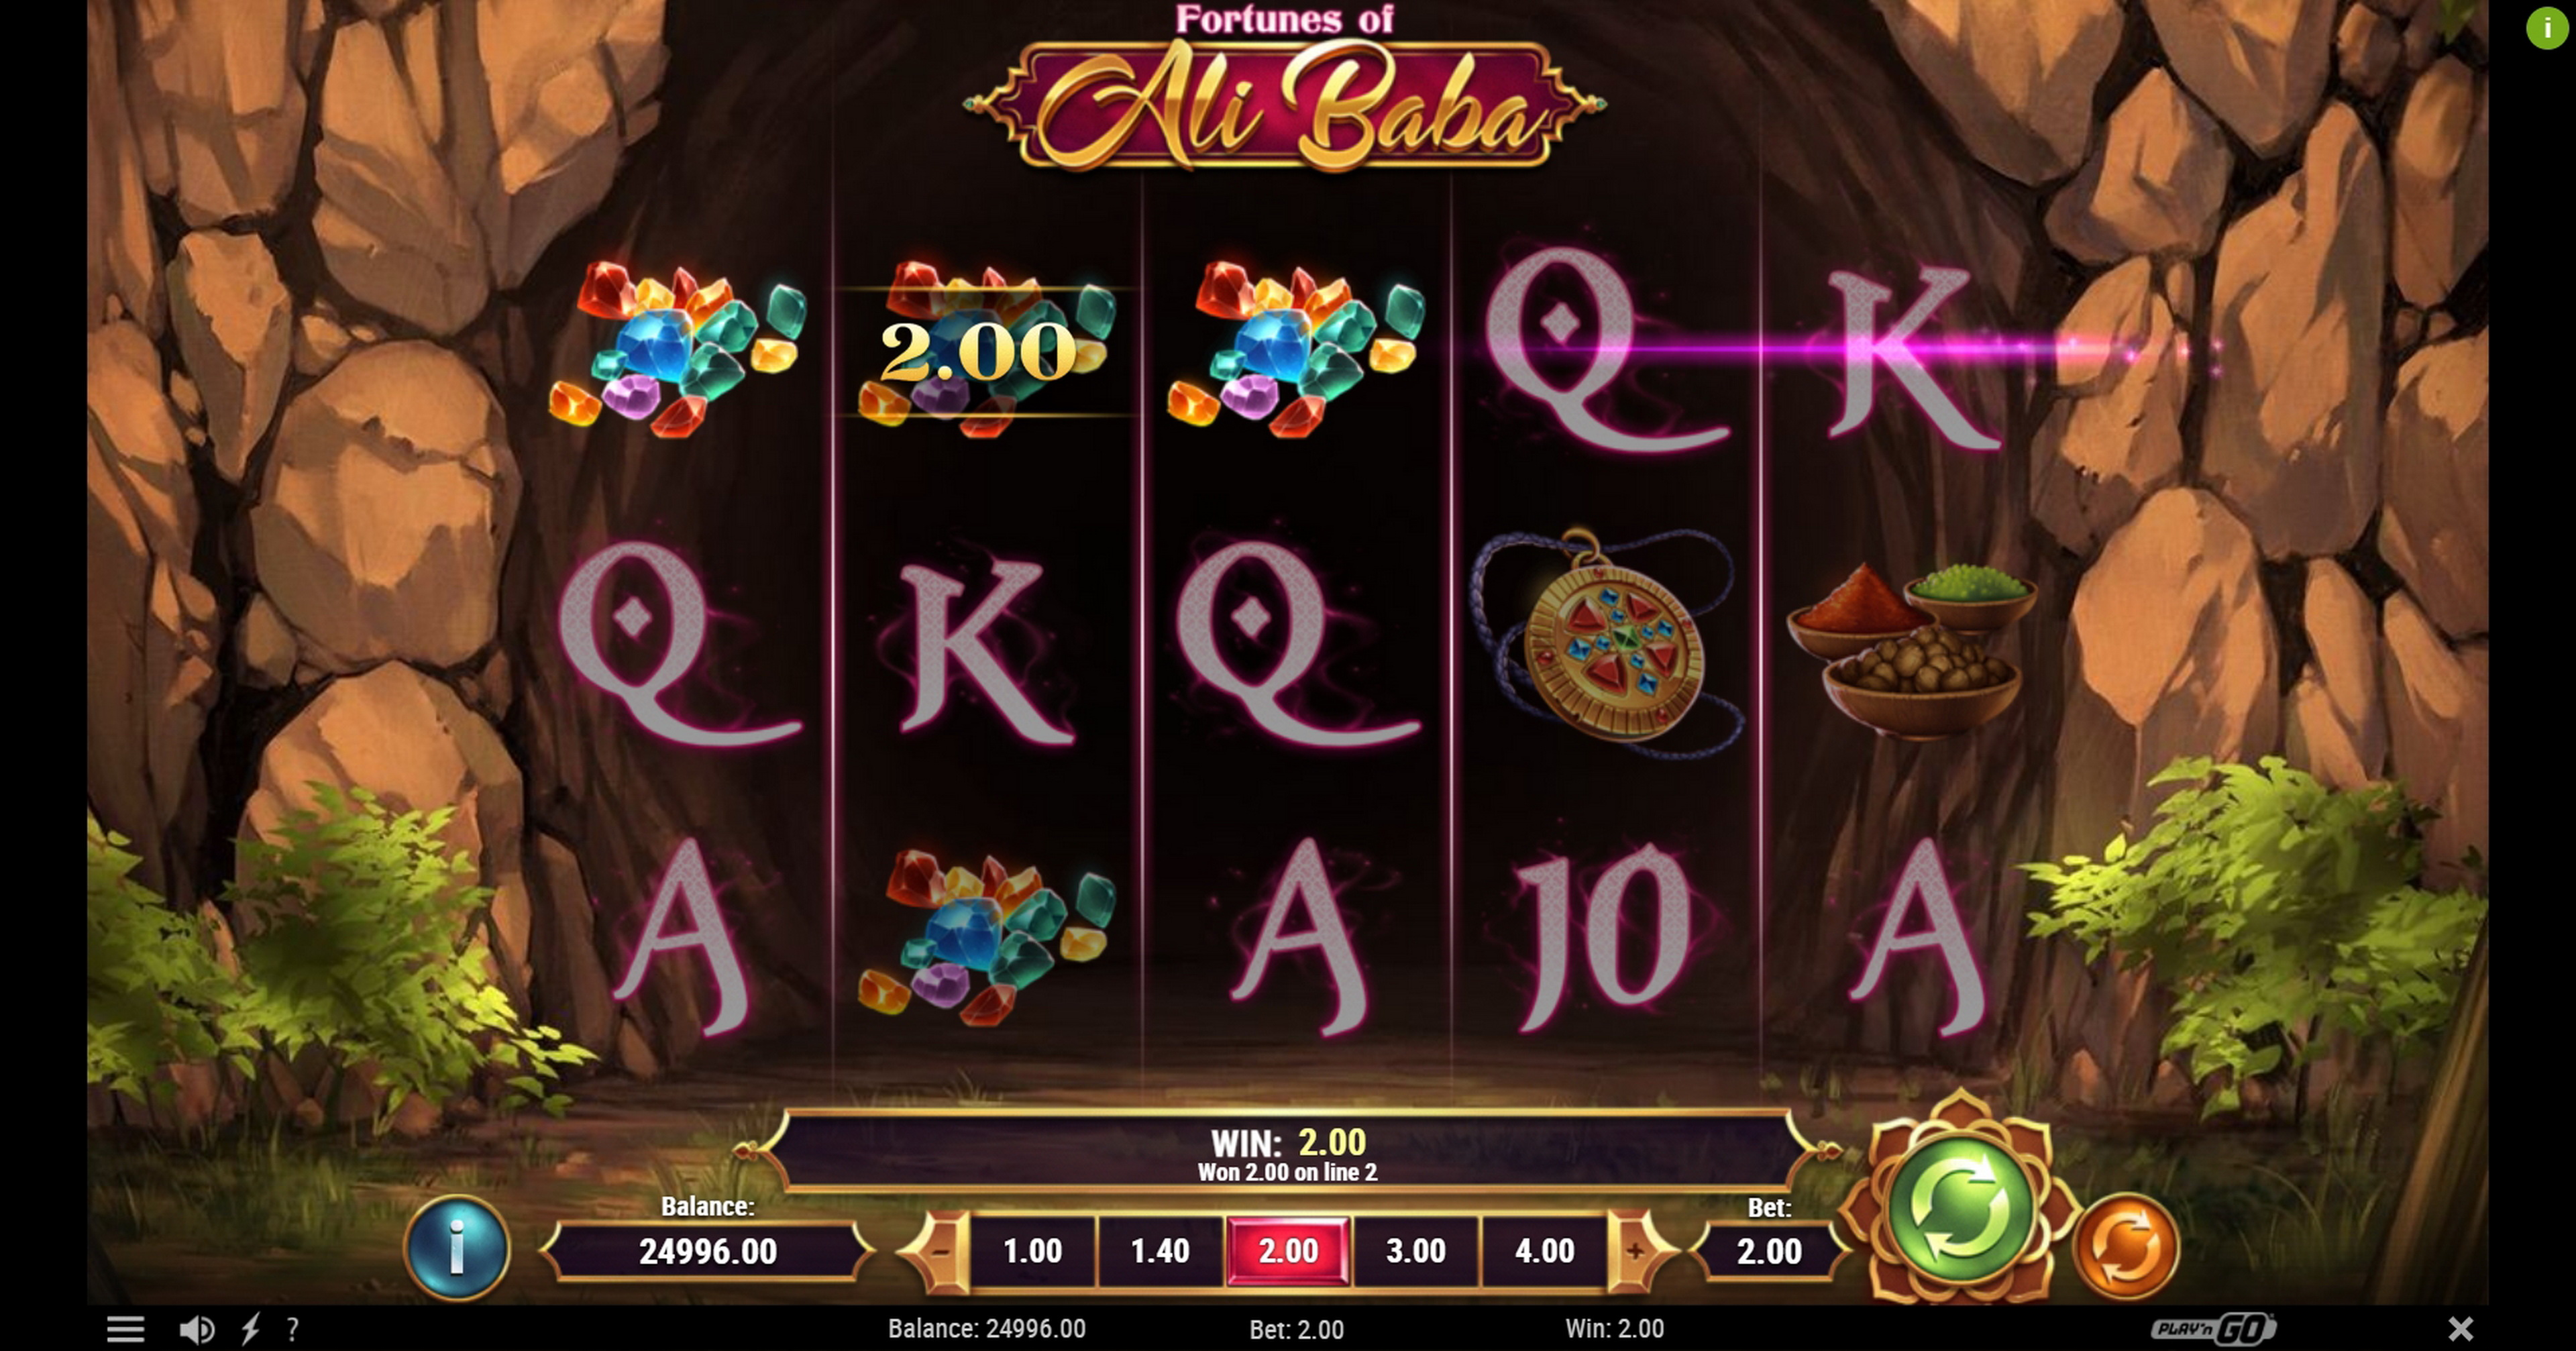 Win Money in Fortunes of Alibaba Free Slot Game by Playn GO